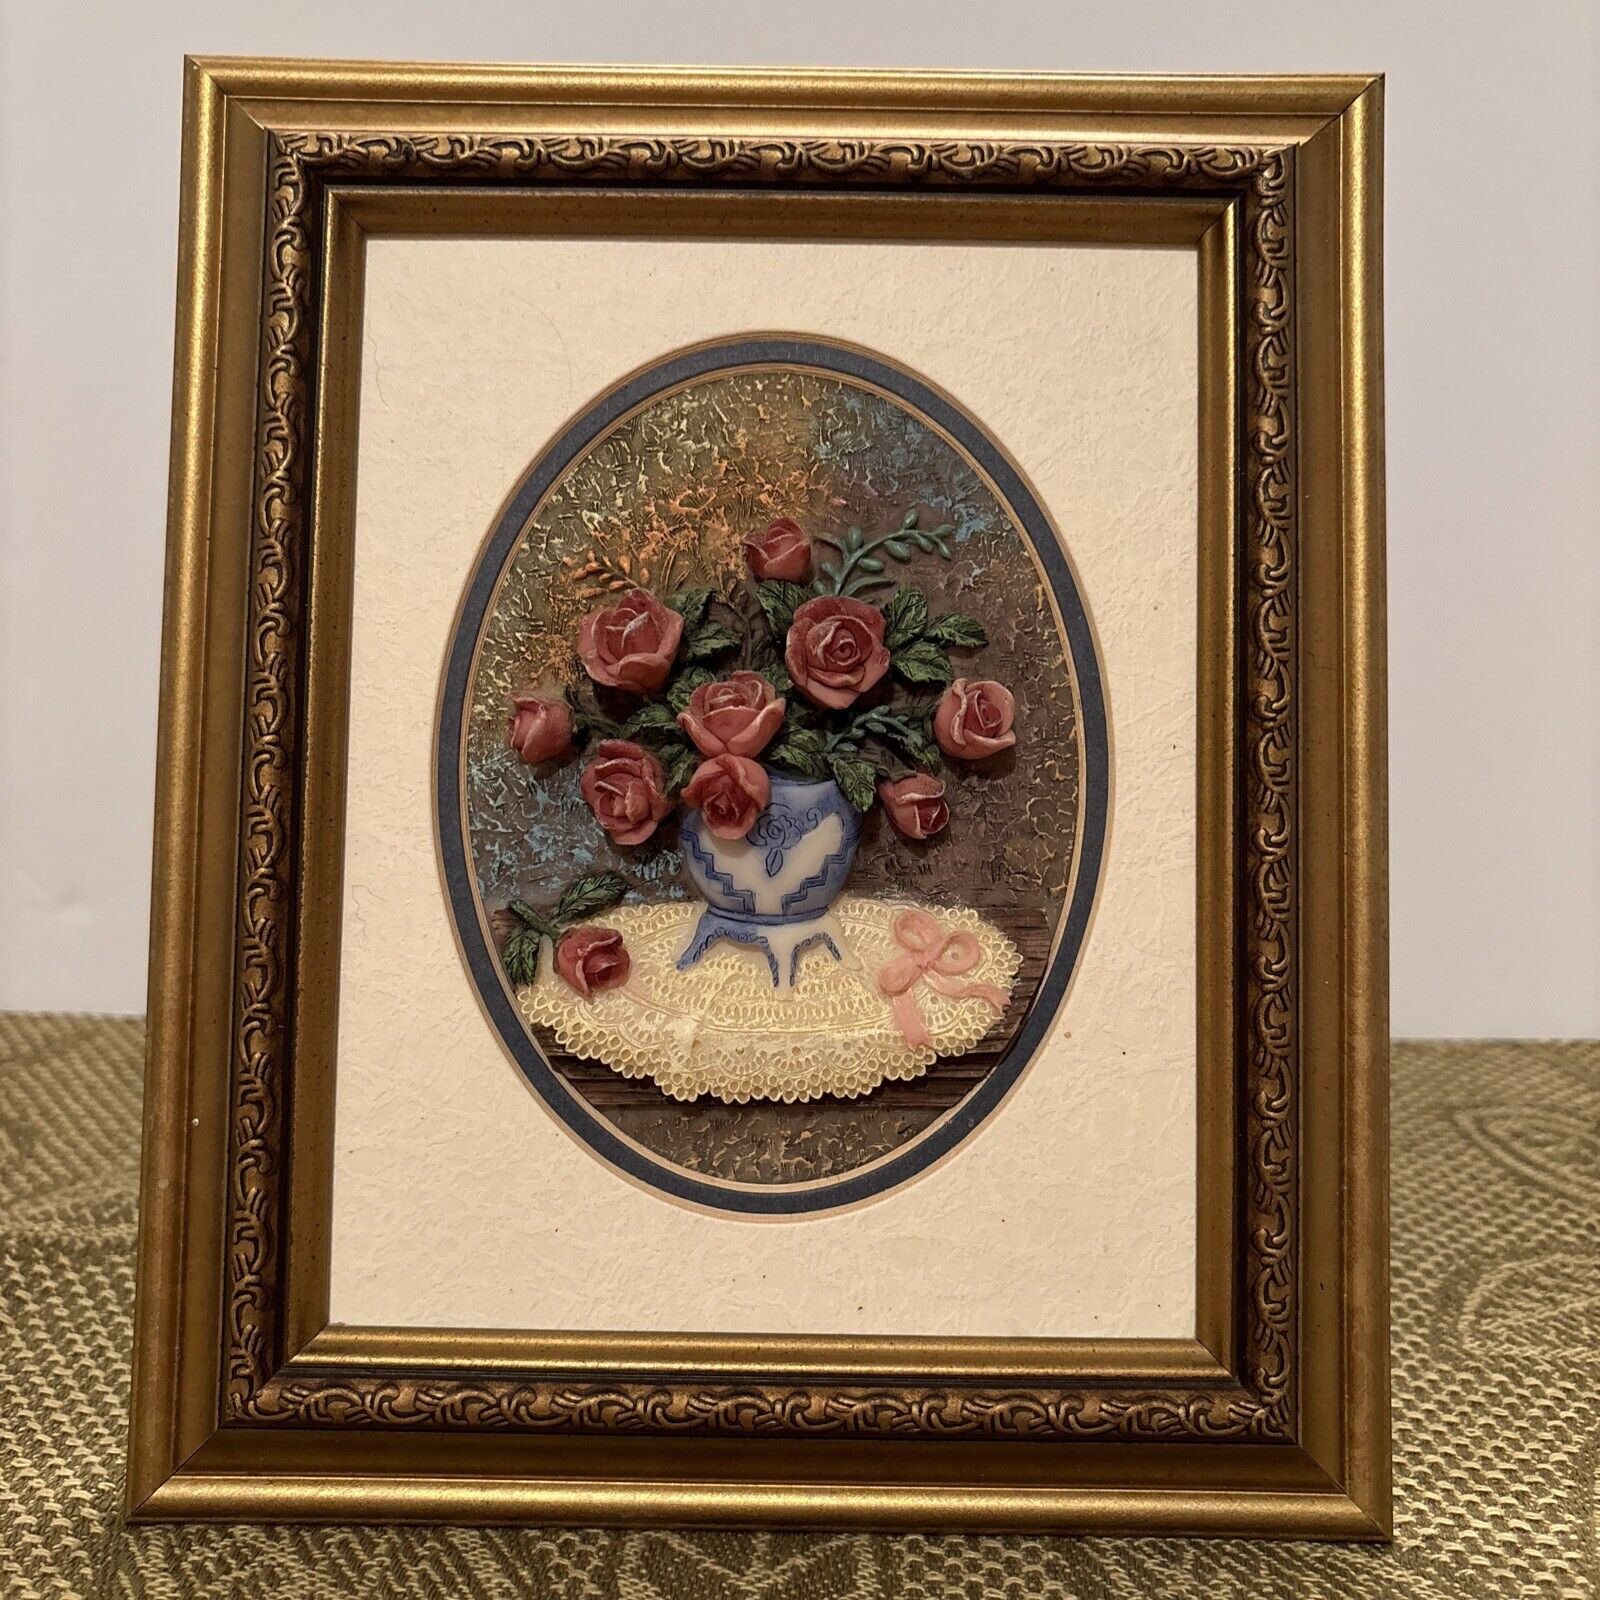 Vintage 3D Resin Rose Framed Wall Table Art Hand Painted A. Richesco Corp.